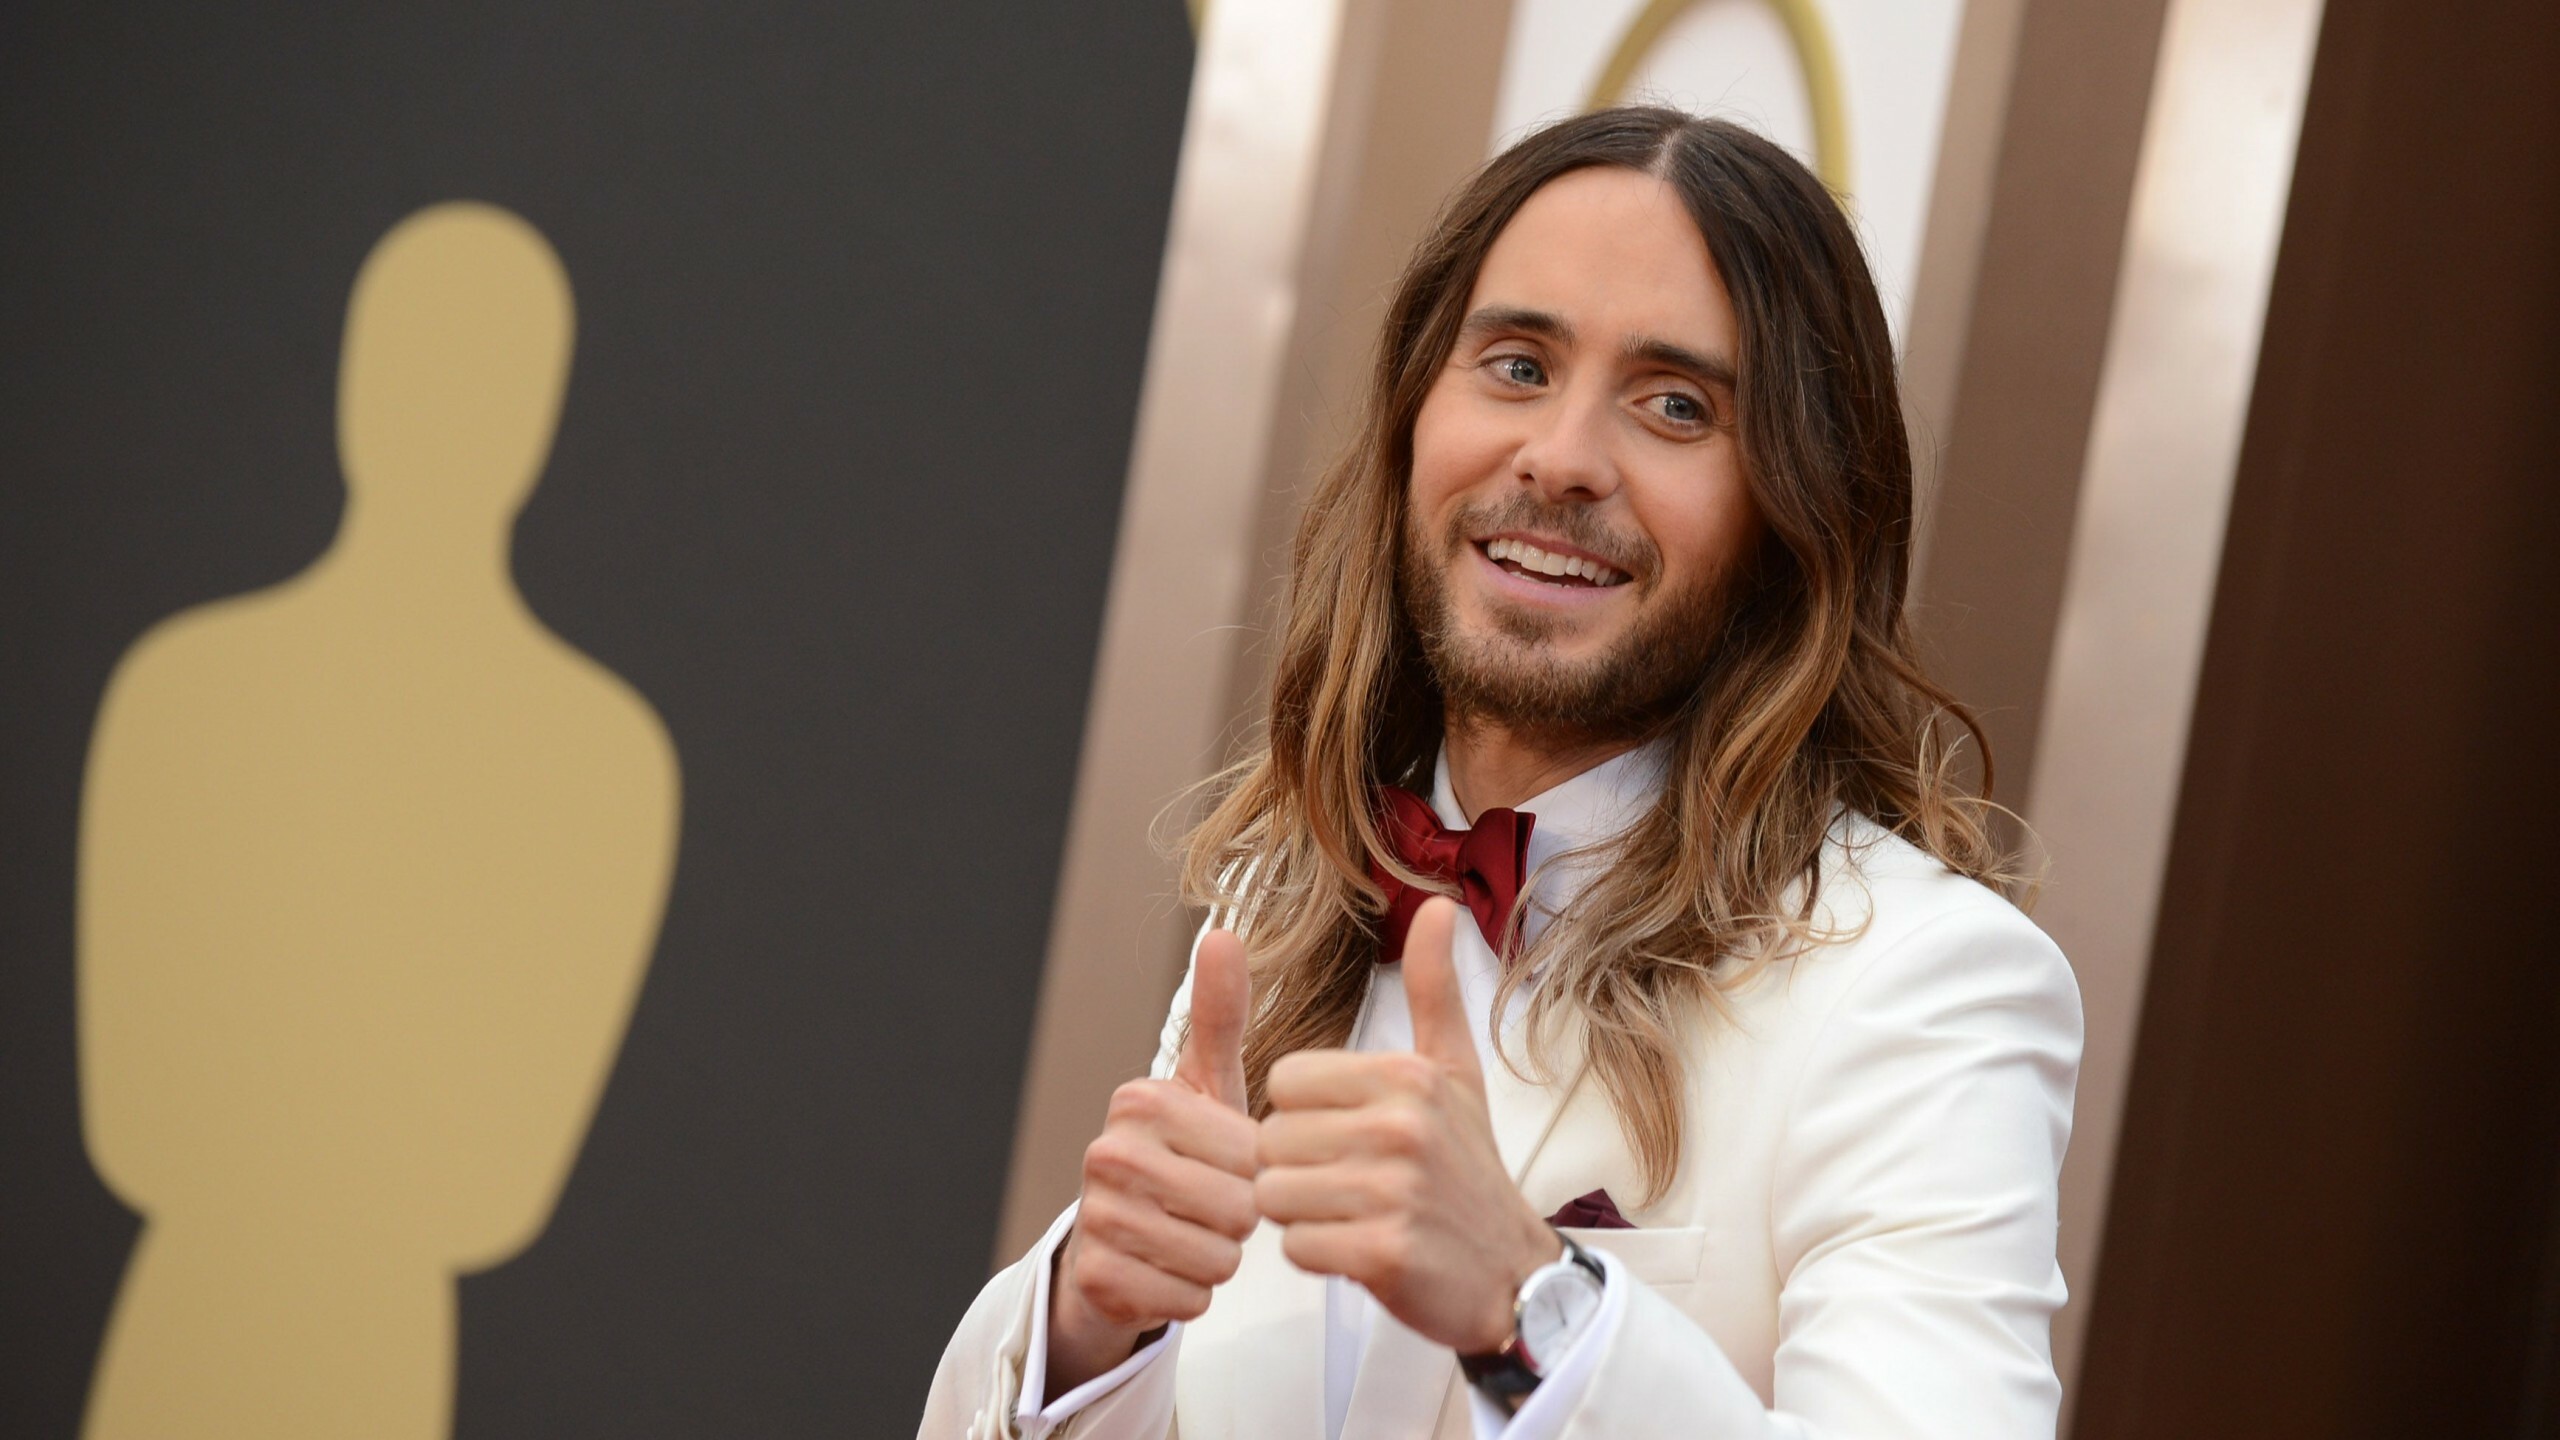 Jared Leto: Actor and singer, Thirty Seconds to Mars, 86th Academy Awards, Celebrities. 2560x1440 HD Wallpaper.